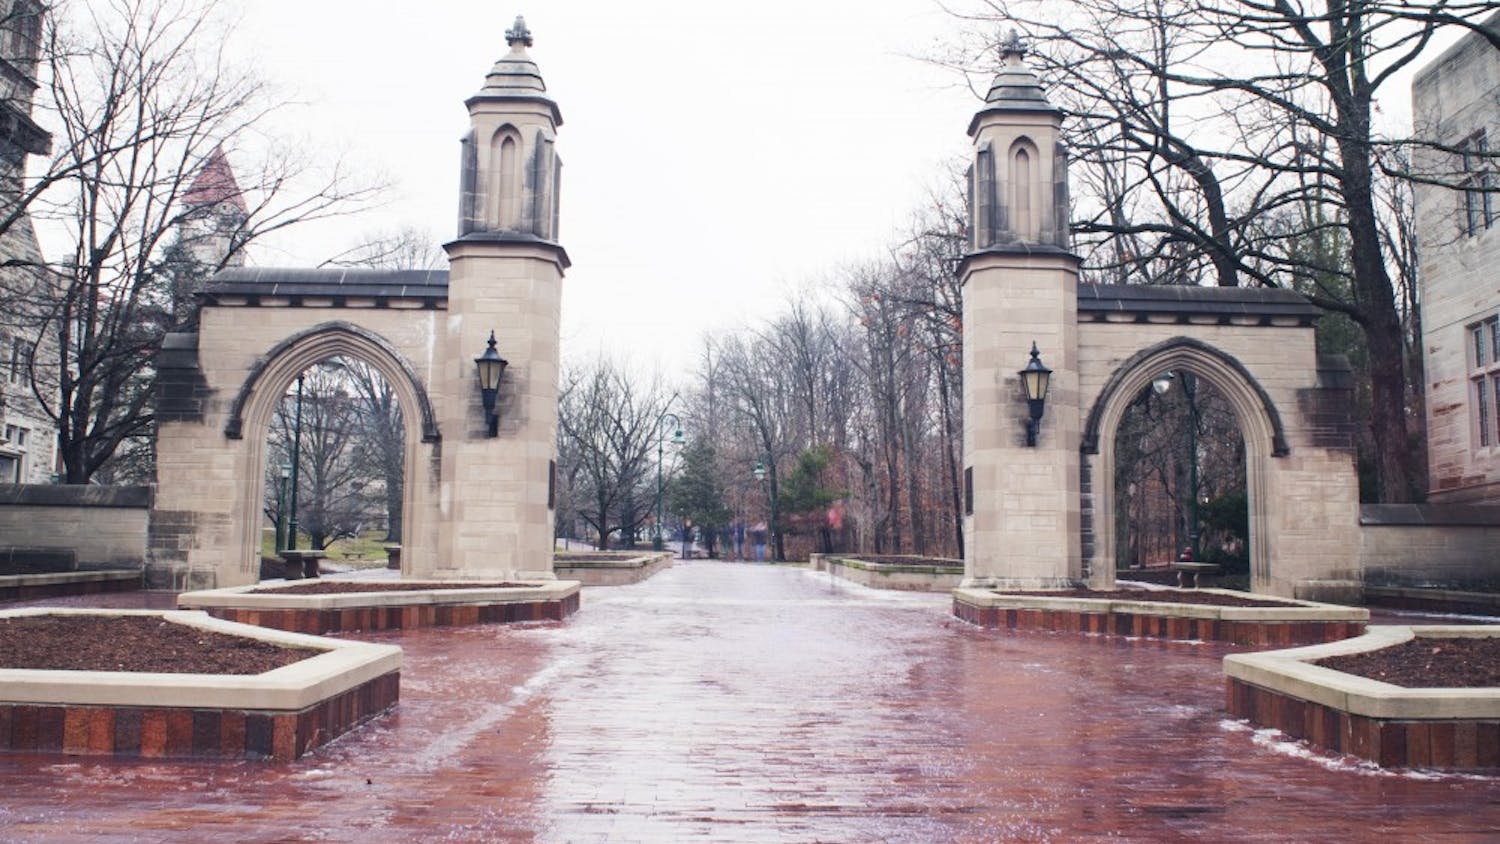 The Sample Gates area on campus sits quiet in between classes. Students weighed in on their first day of classes of spring semester in interviews on Indiana Ave.